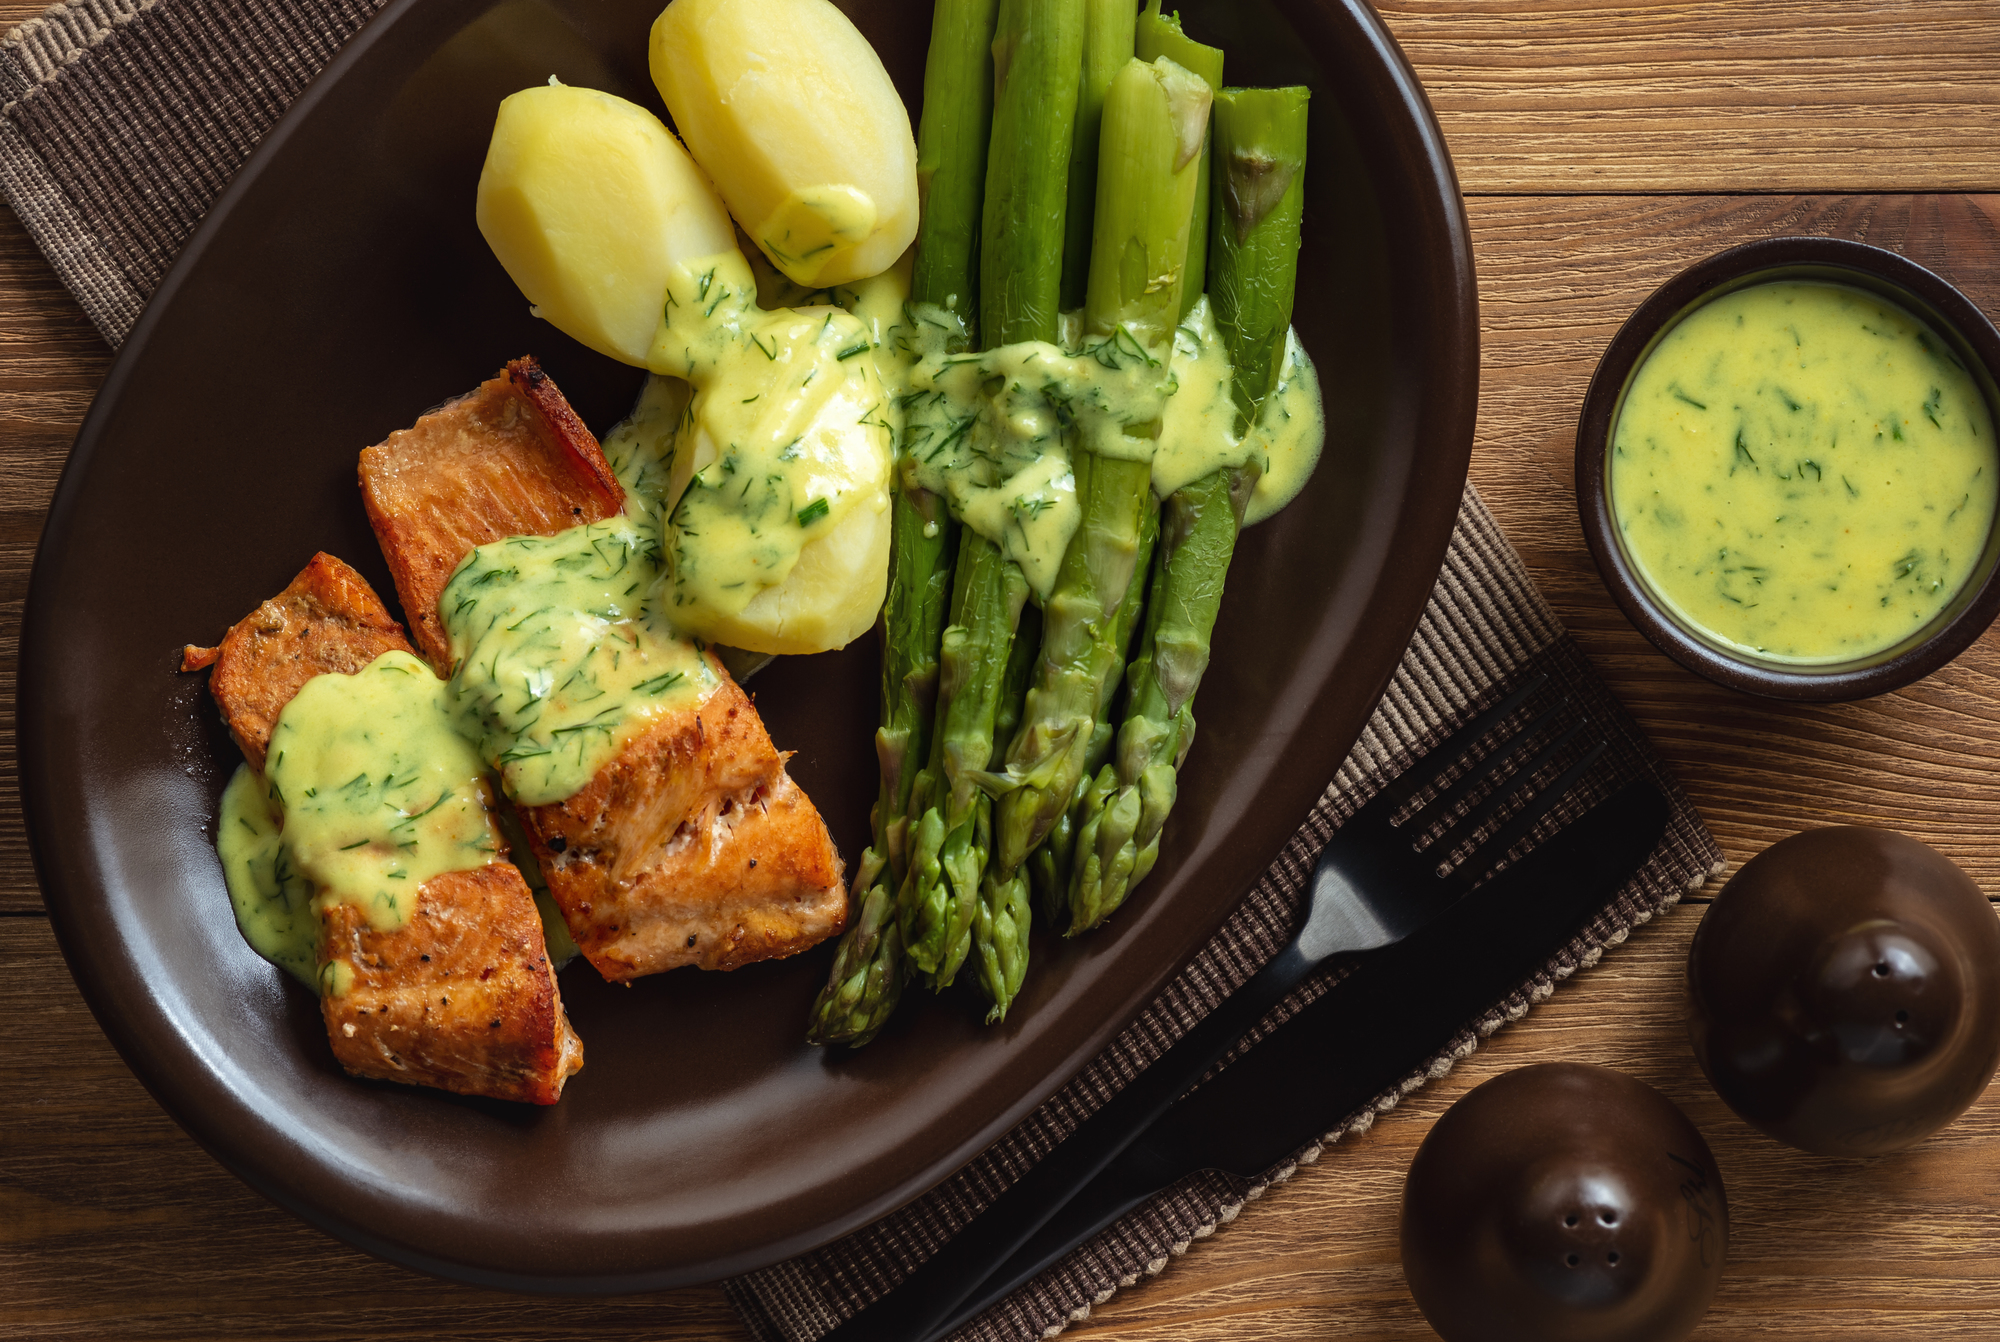 Roasted salmon with boiled potatoes and asparagus